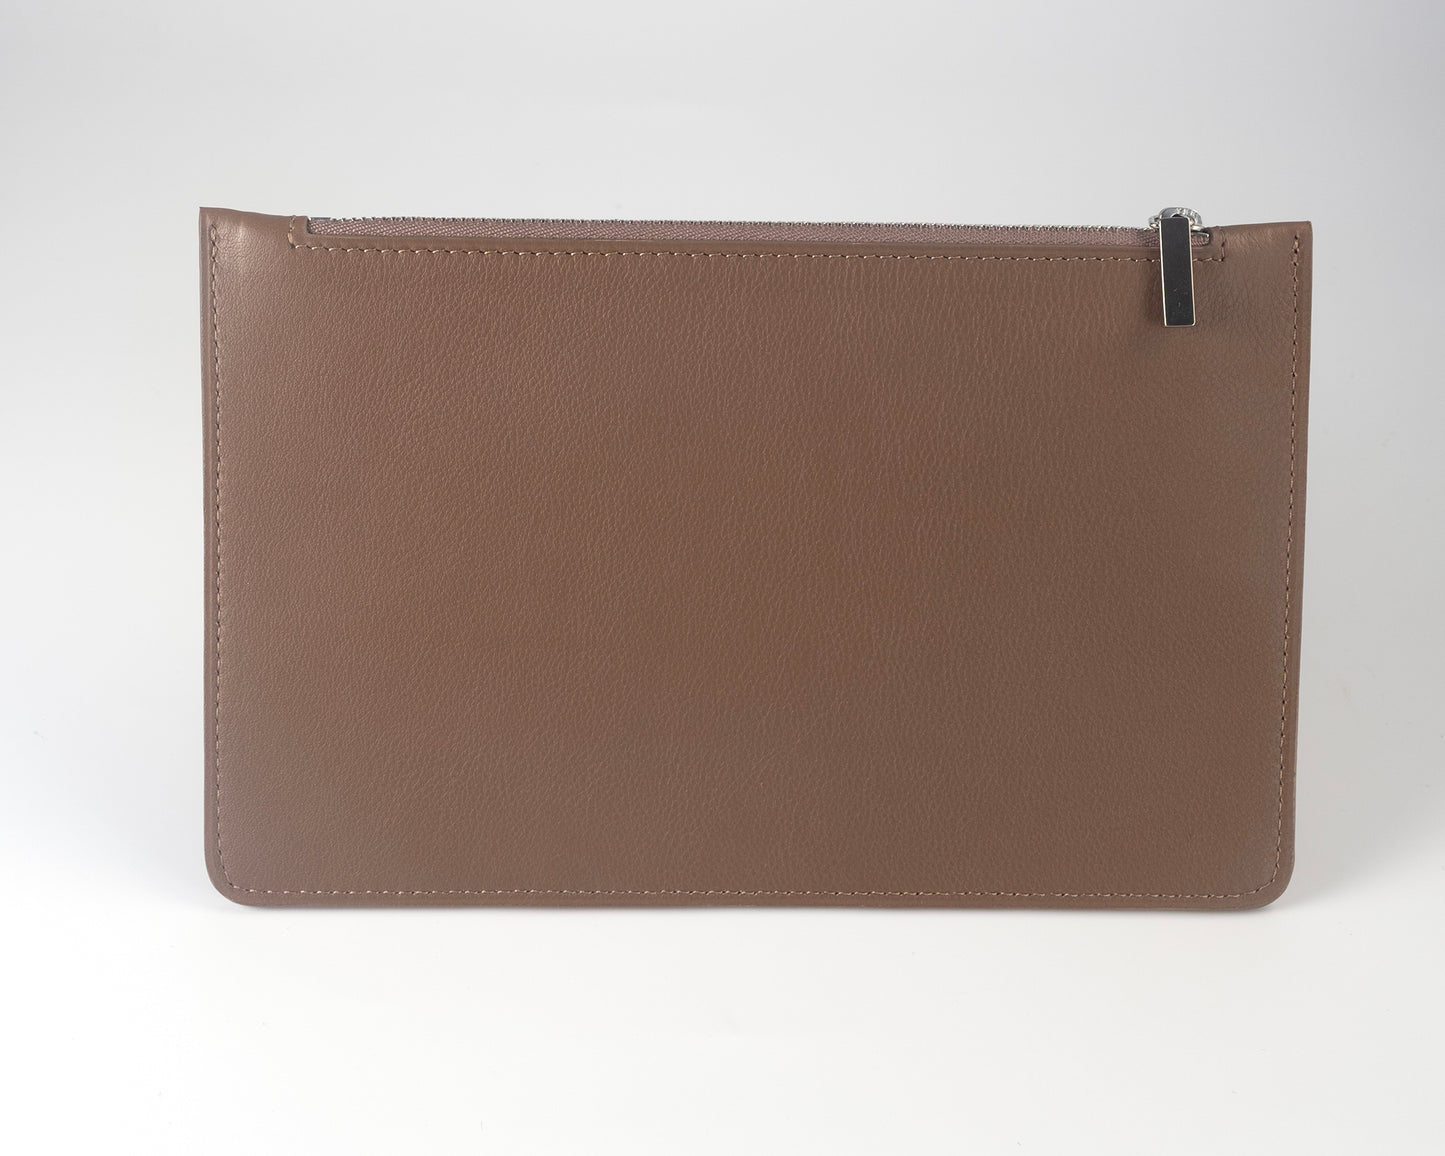 Taupe leather city clutch bag